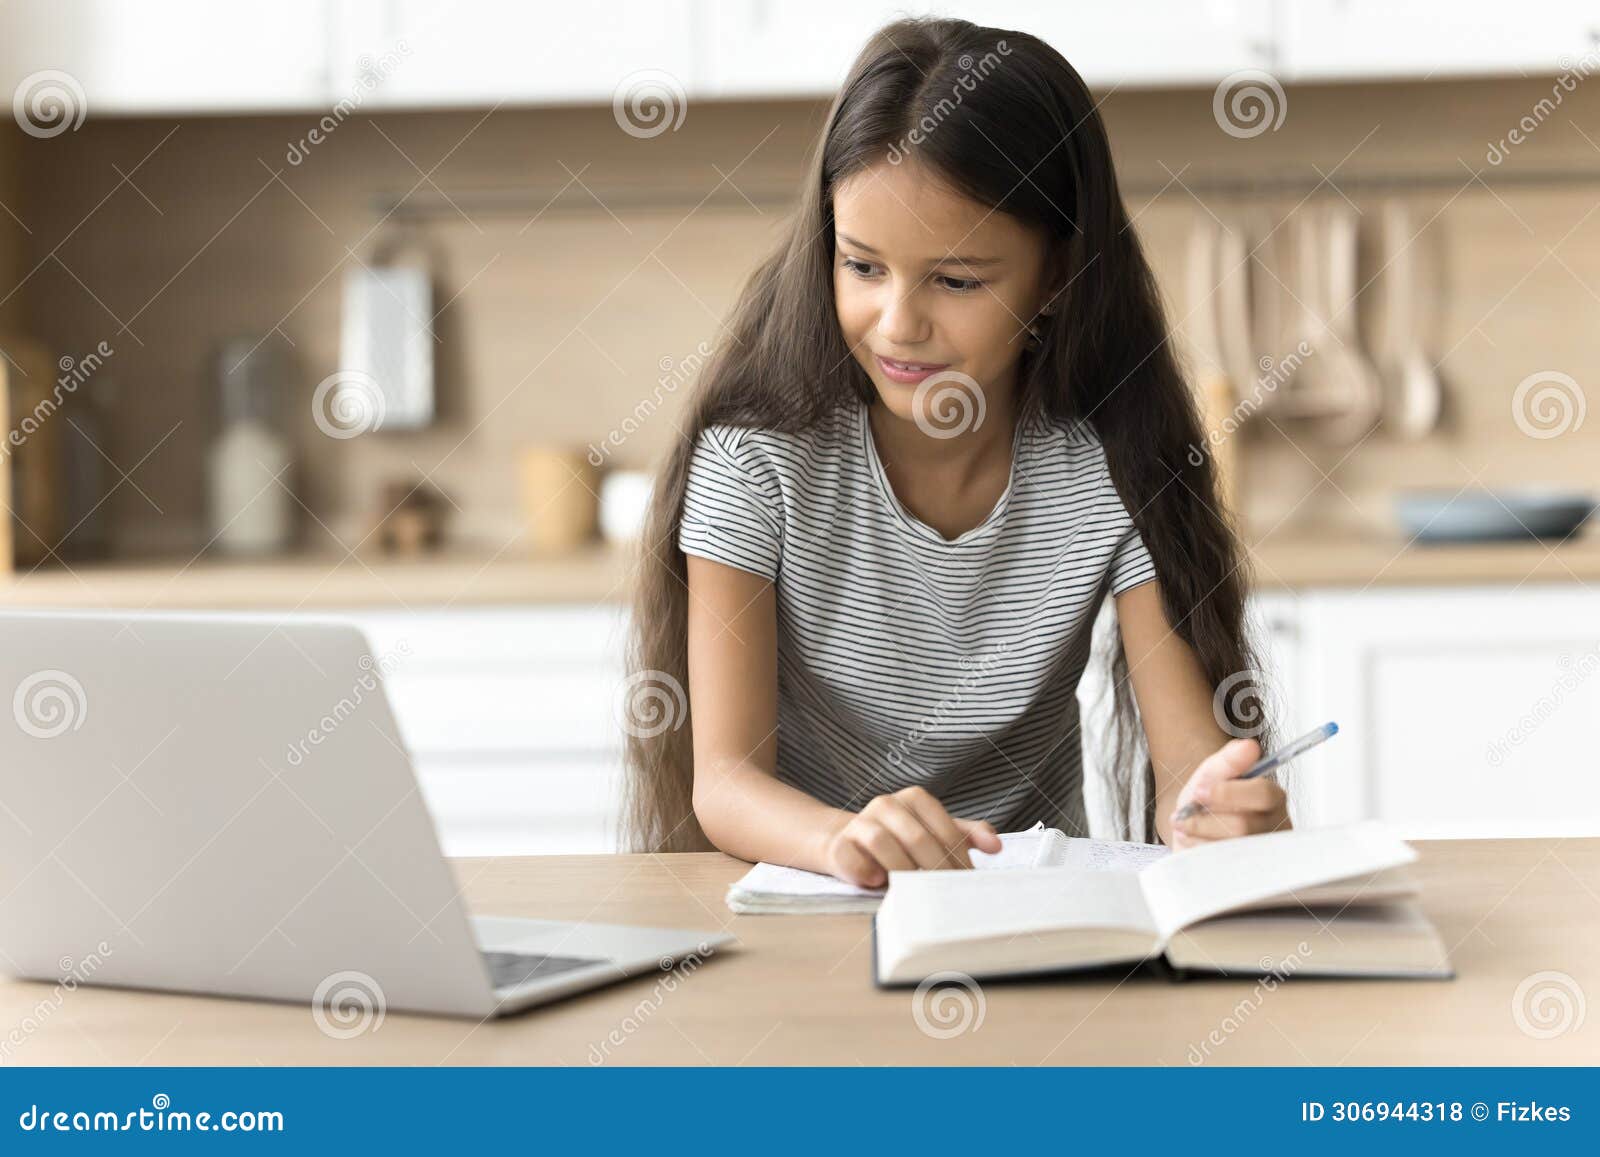 focused positive schoolkid studying at home, watching online lesson